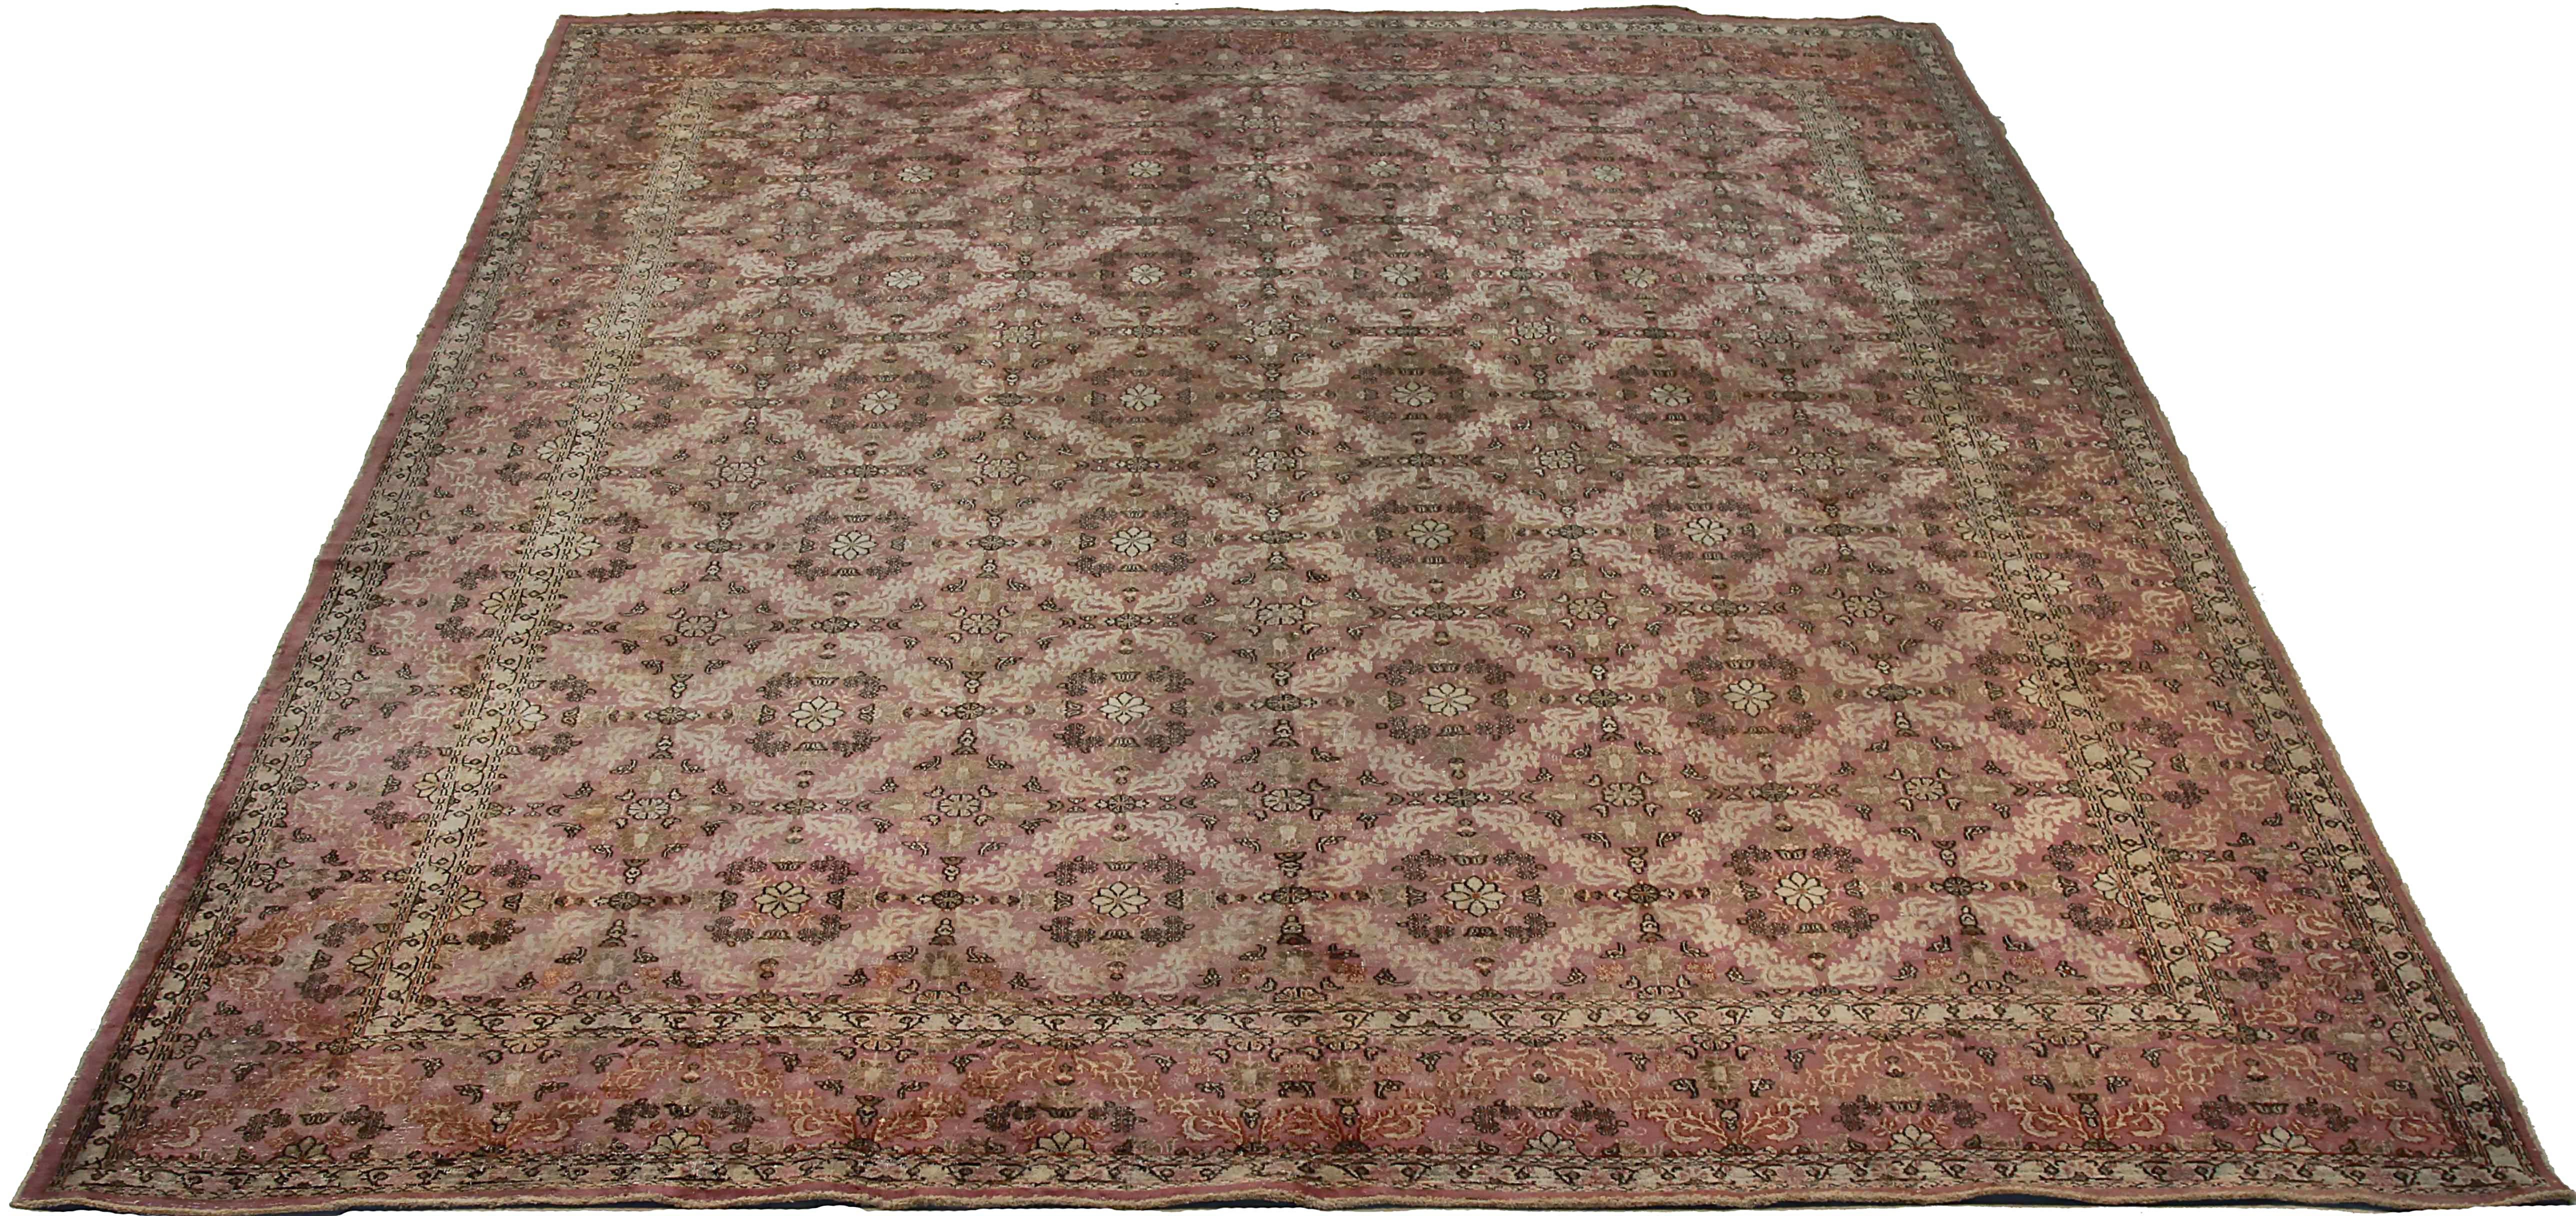 Antique Persian area rug handwoven from the finest sheep’s wool. It’s colored with all-natural vegetable dyes that are safe for humans and pets. It’s a traditional Moud design handwoven by expert artisans. It’s a lovely area rug that can be